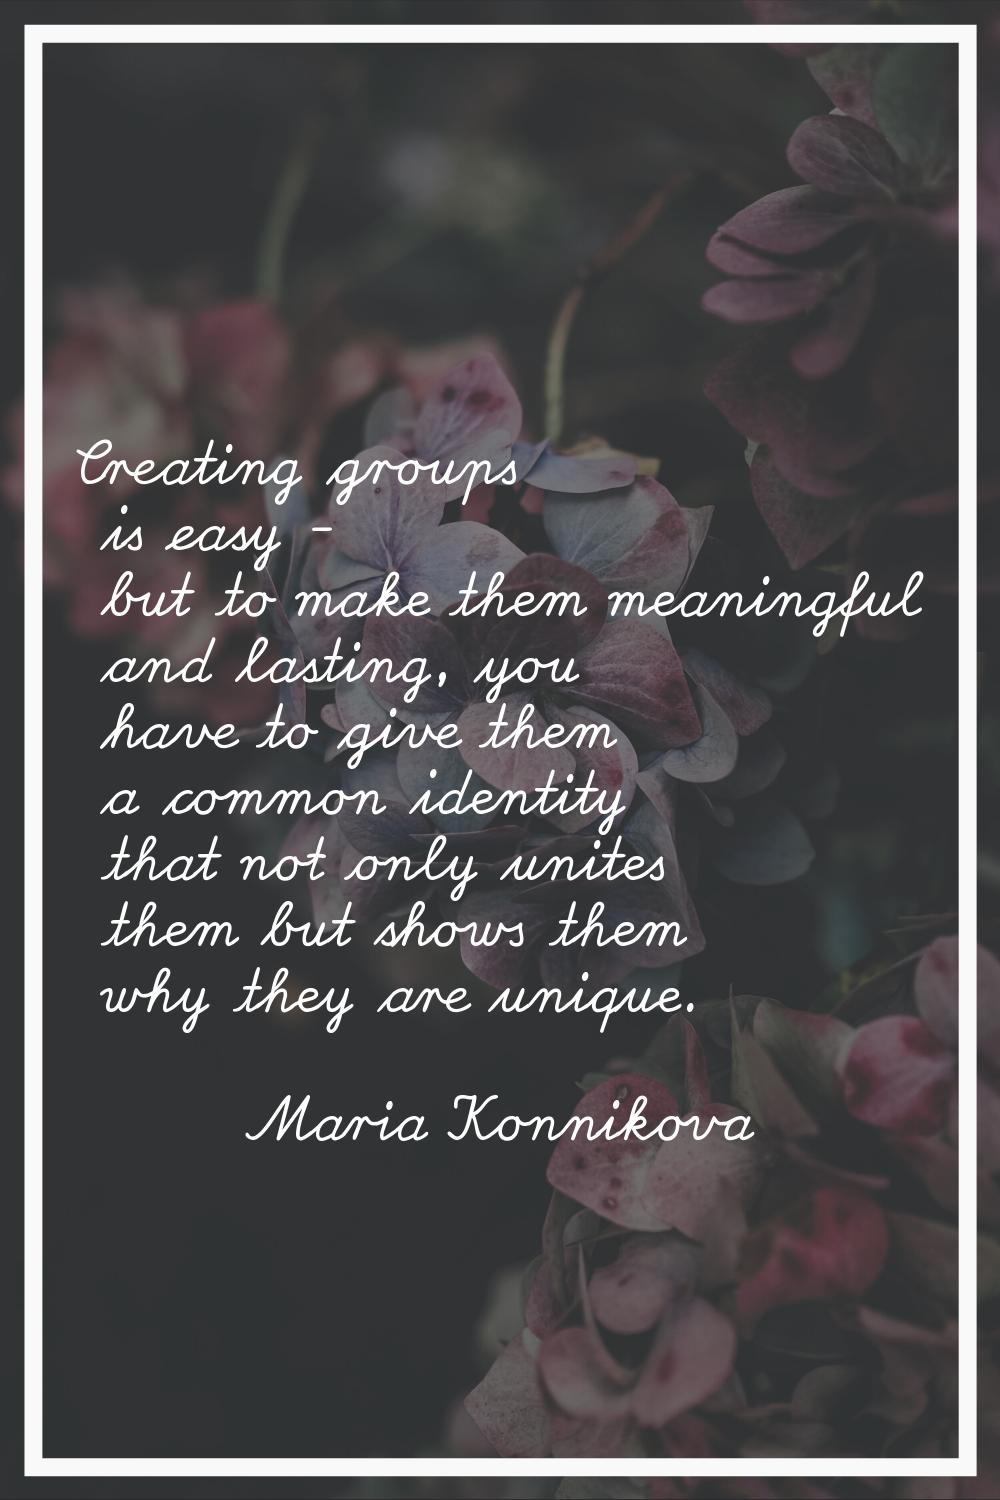 Creating groups is easy - but to make them meaningful and lasting, you have to give them a common i